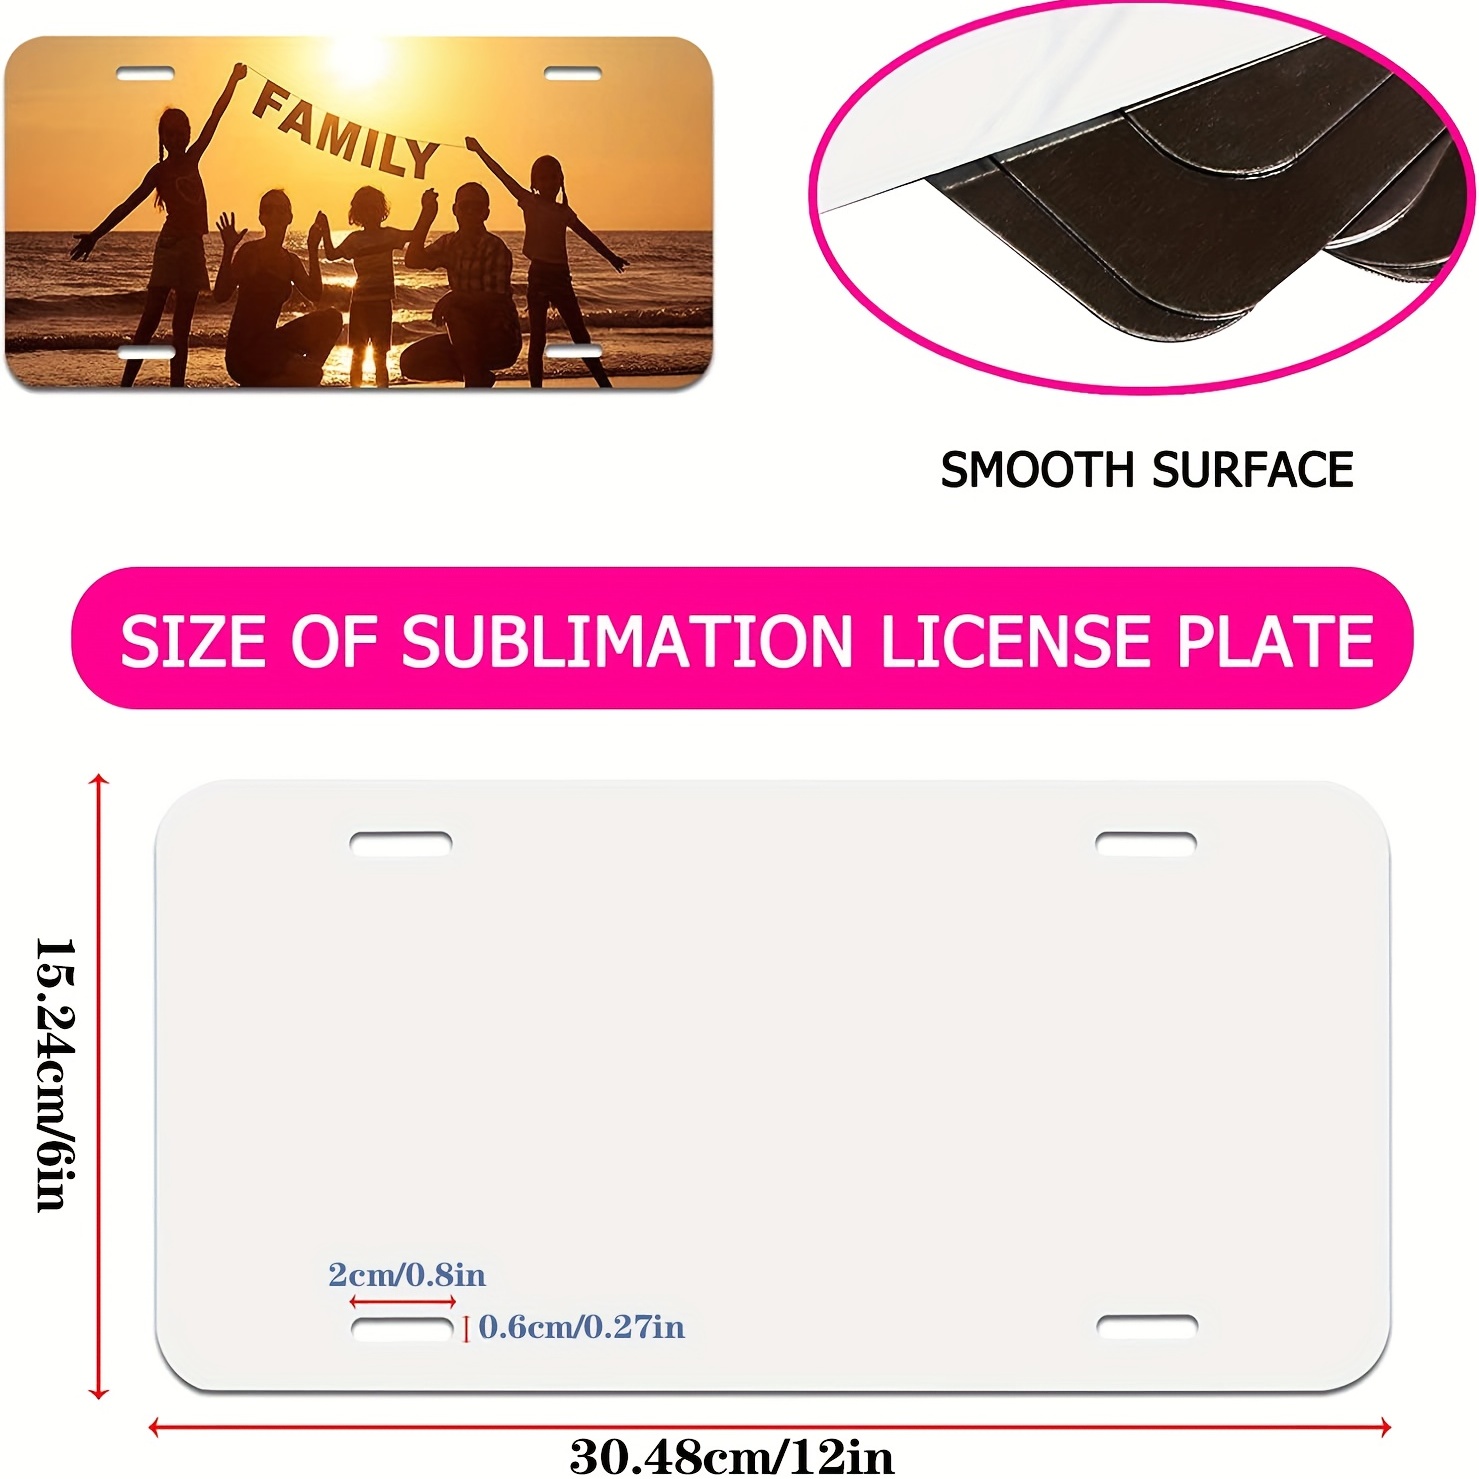 10 Pack Sublimation License Plate Blanks 6x12 x 0.65mm,Metal Aluminum Automotive Front License Plate Tag